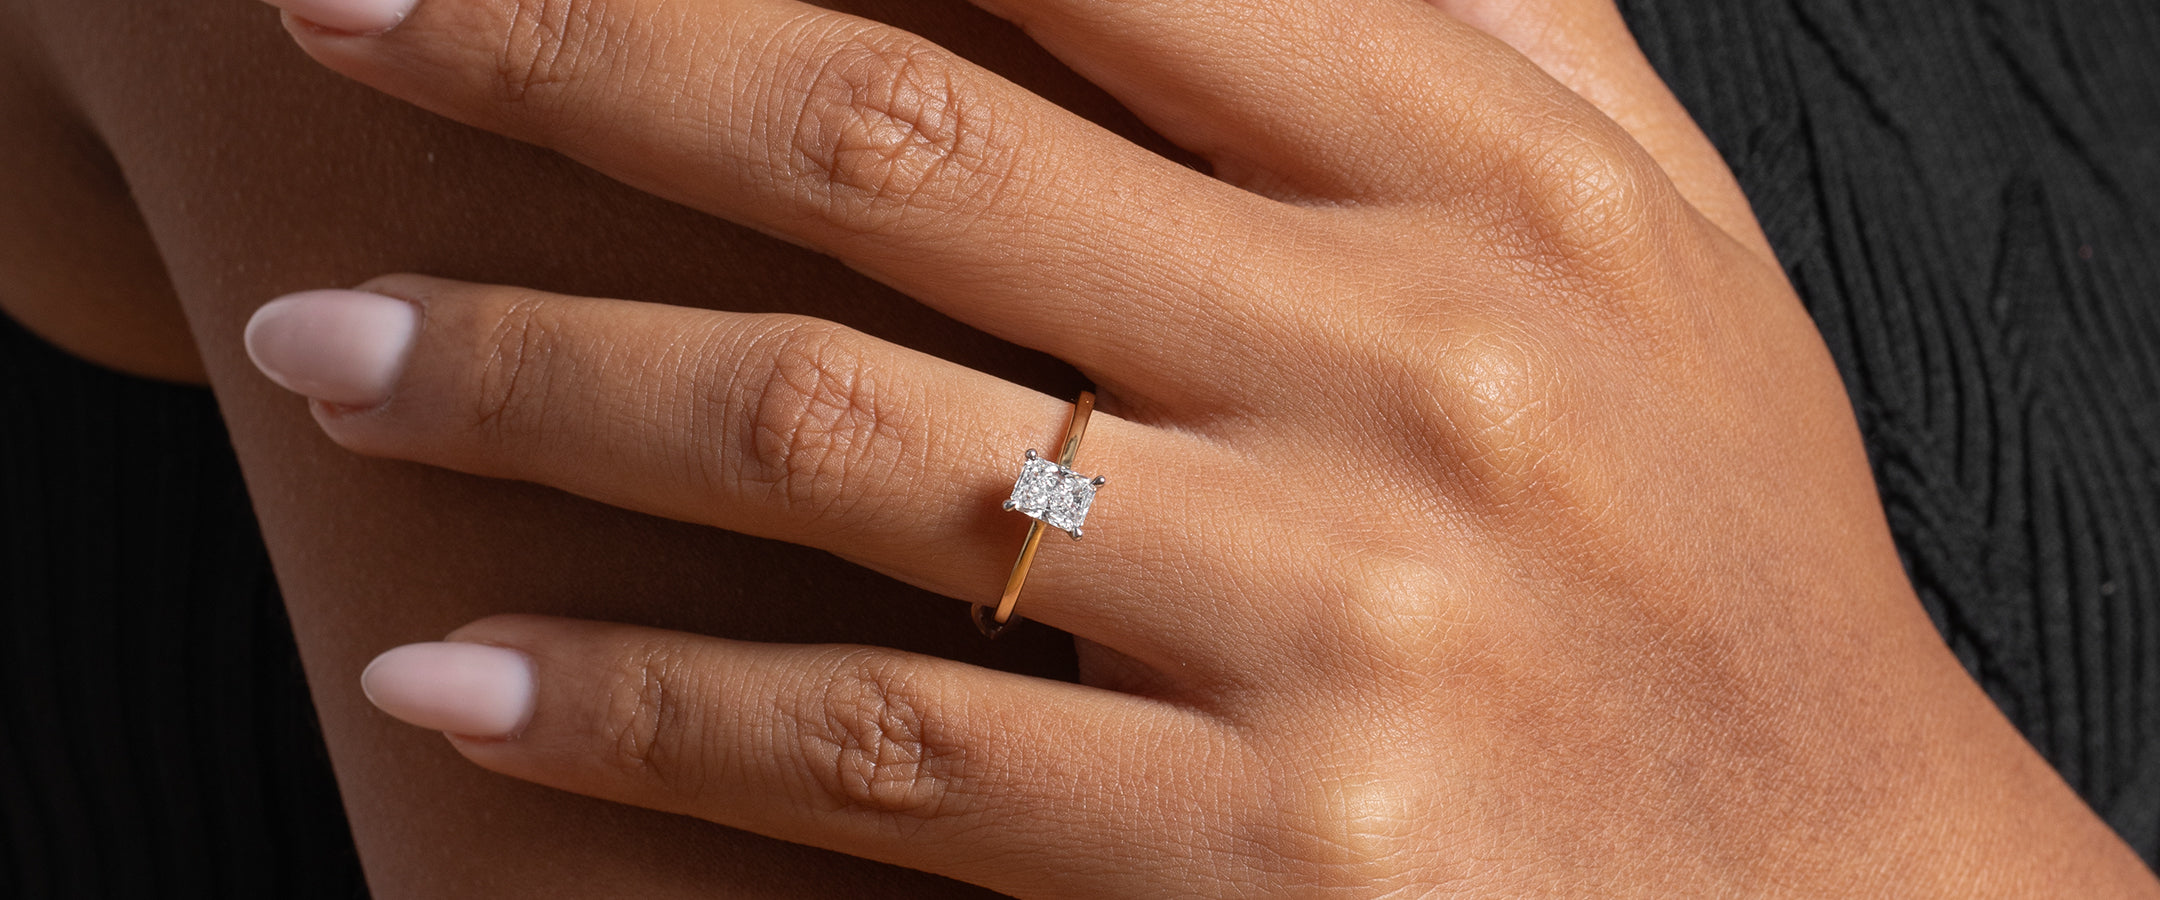 Woman's hand wearing a radiant cut diamond Engagement Rings by Gear Jewellers